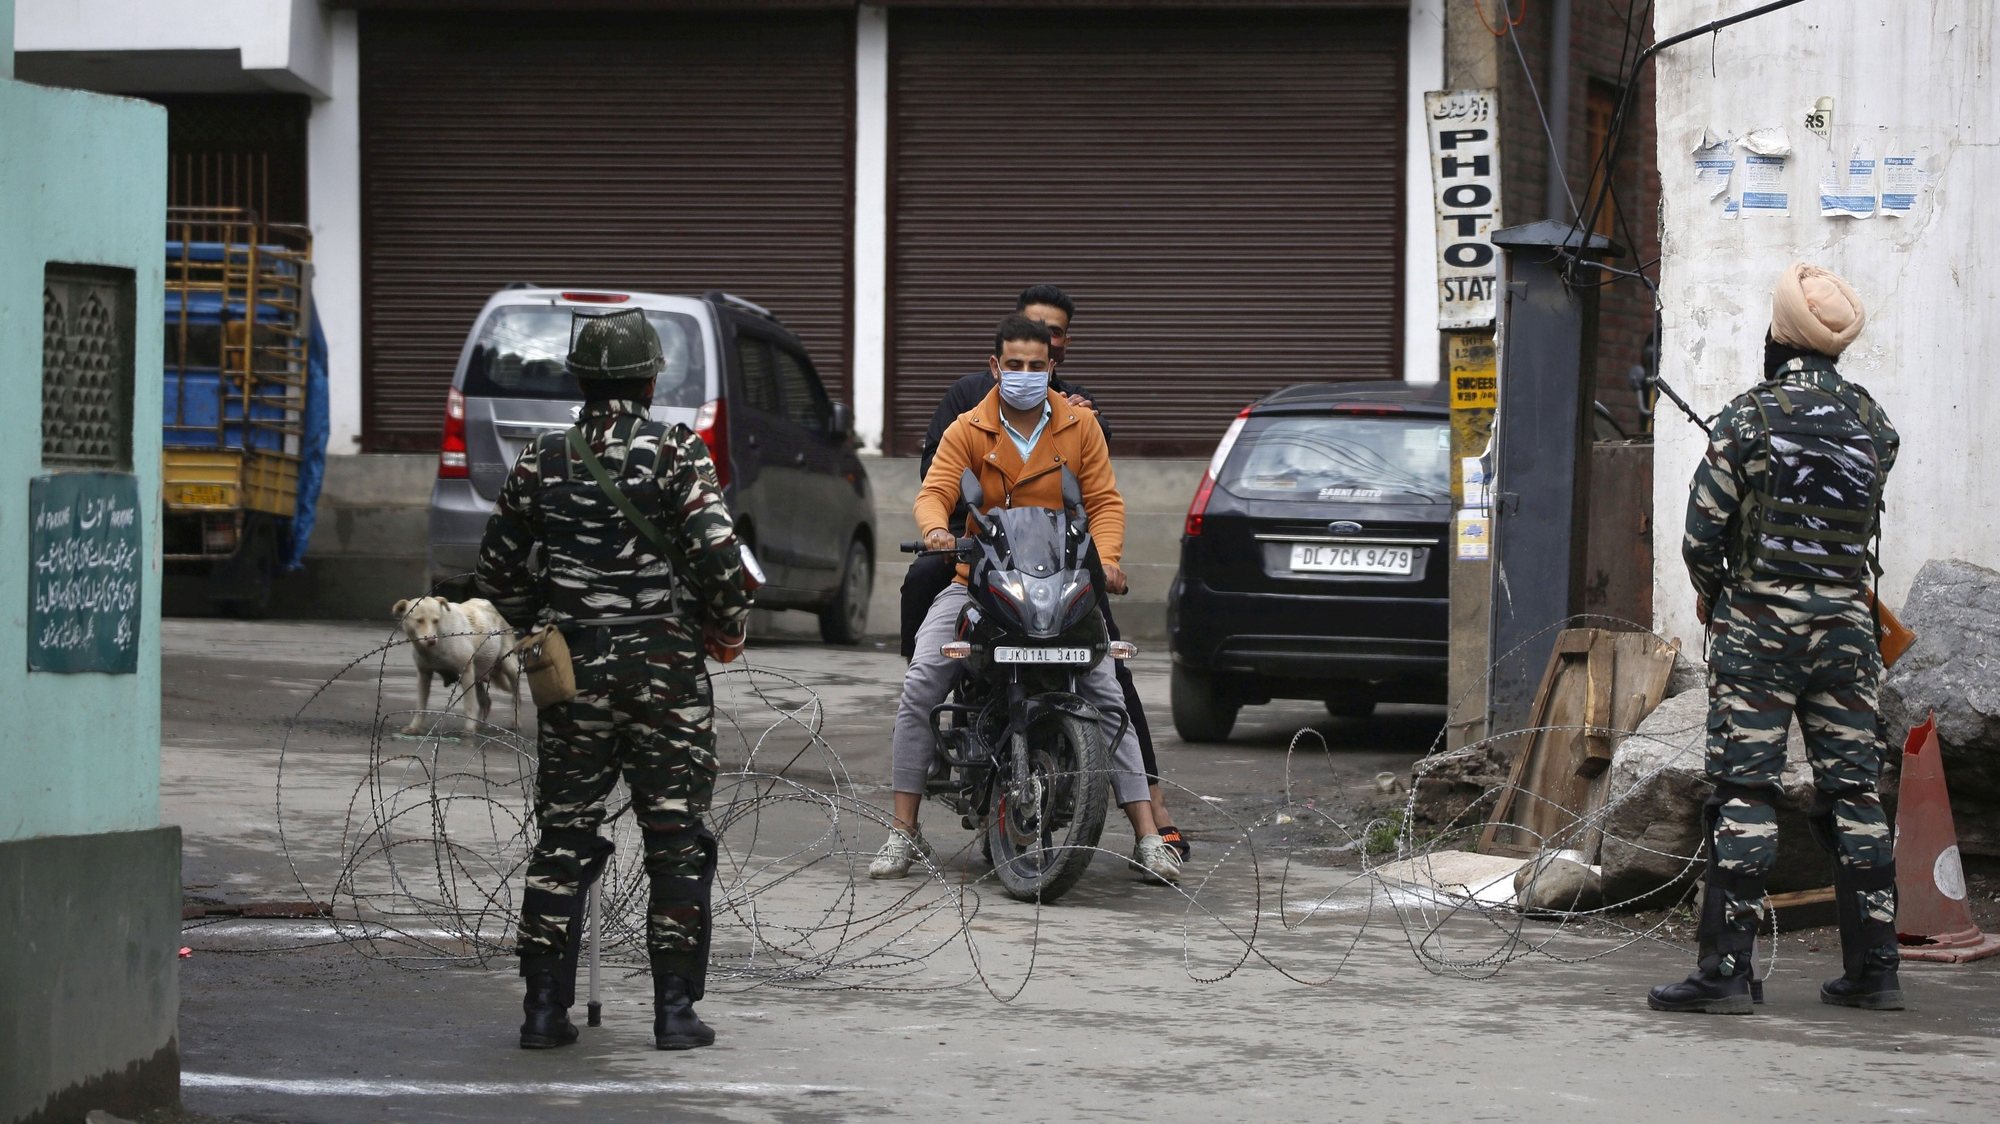 epa09195995 Indian paramilitary soldiers stop a Kashmiri motorcyclist near barbed wire set up as barricade during lockdown in Srinagar, the summer capital of Indian Kashmir, 13 May 2021. Kashmiri Muslims offer Eid prayers at heritage Aali Masjid and mosques in interior areas while following Covid guidelines. Most of major mosques and shrines in Indian Kashmir remained closed in view of Covid lockdown enforced by authorities to prevent spread of Coronavirus pandemic.  EPA/FAROOQ KHAN